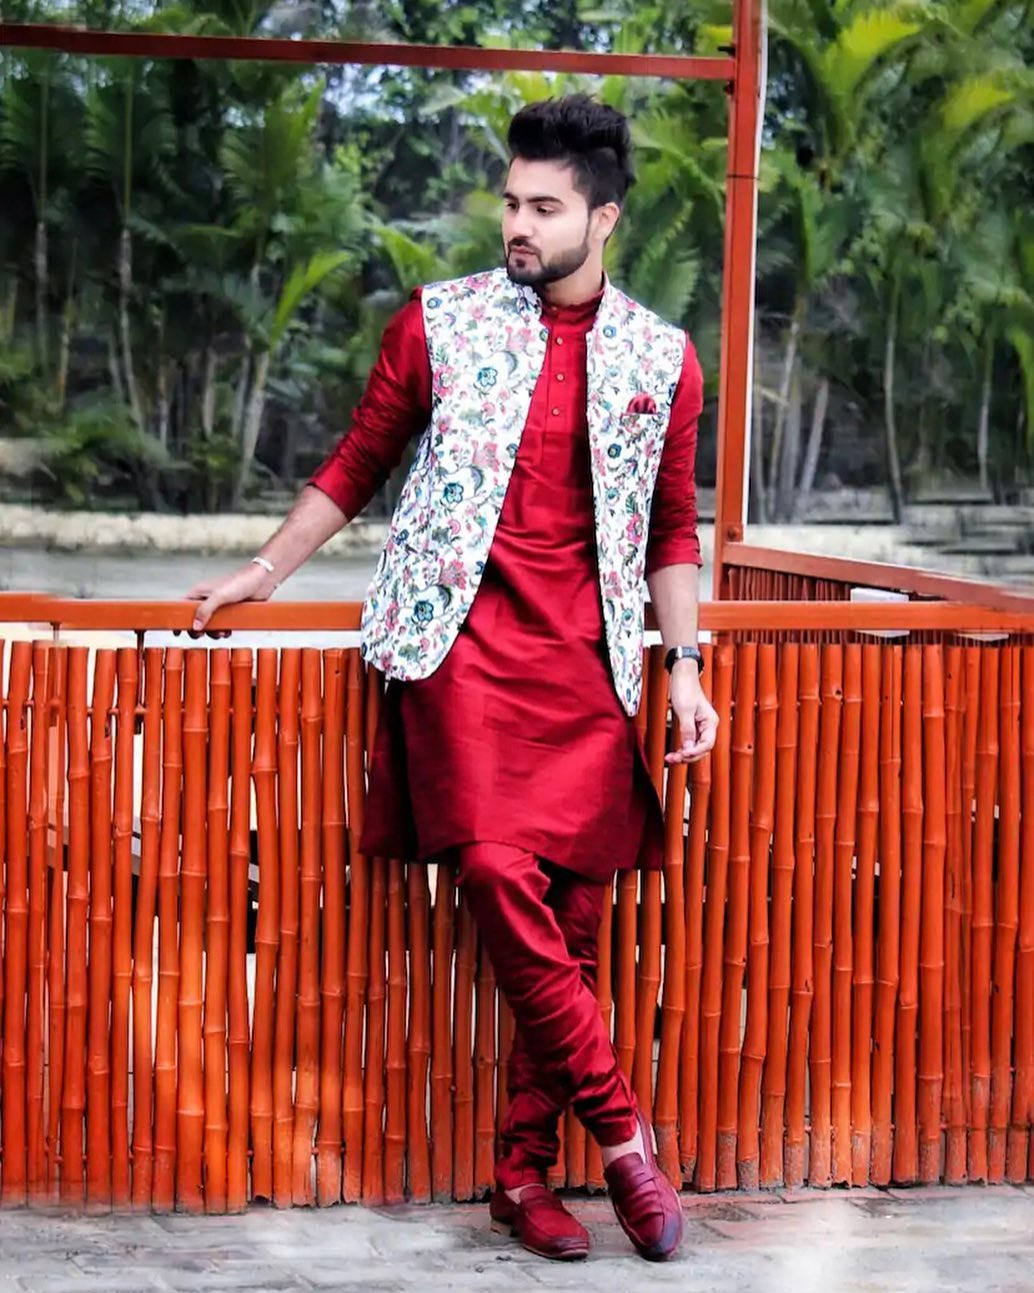 MYNTRA - Bright colors spice up your ethnic look!
📸 @harris7417 
Look up similar product code: 4332155 / 6958778 
For more on-point looks, styling hacks and fashion advice, tune in to the binge-worthy...